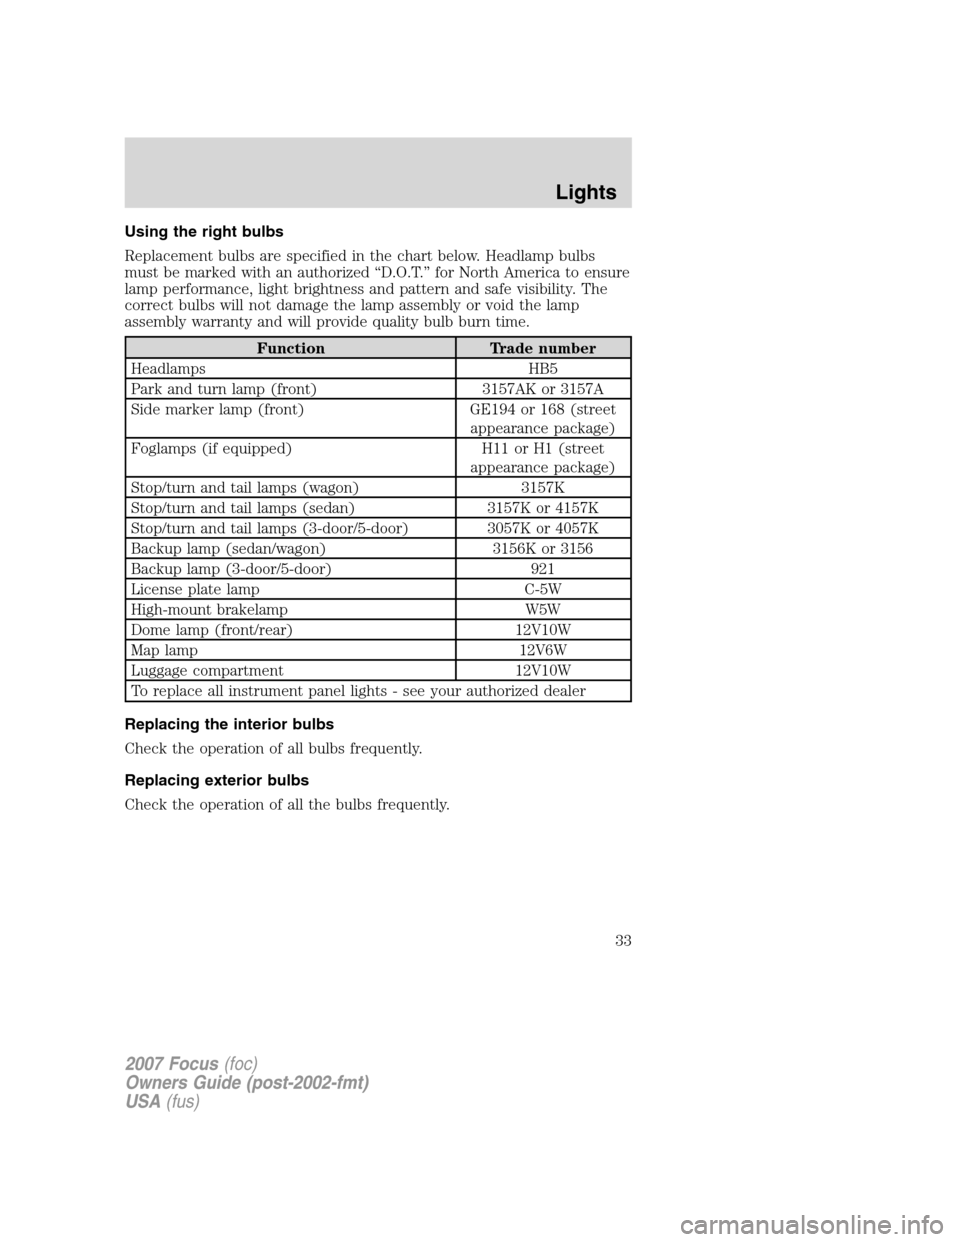 FORD FOCUS 2007 2.G Owners Manual Using the right bulbs
Replacement bulbs are specified in the chart below. Headlamp bulbs
must be marked with an authorized “D.O.T.” for North America to ensure
lamp performance, light brightness a